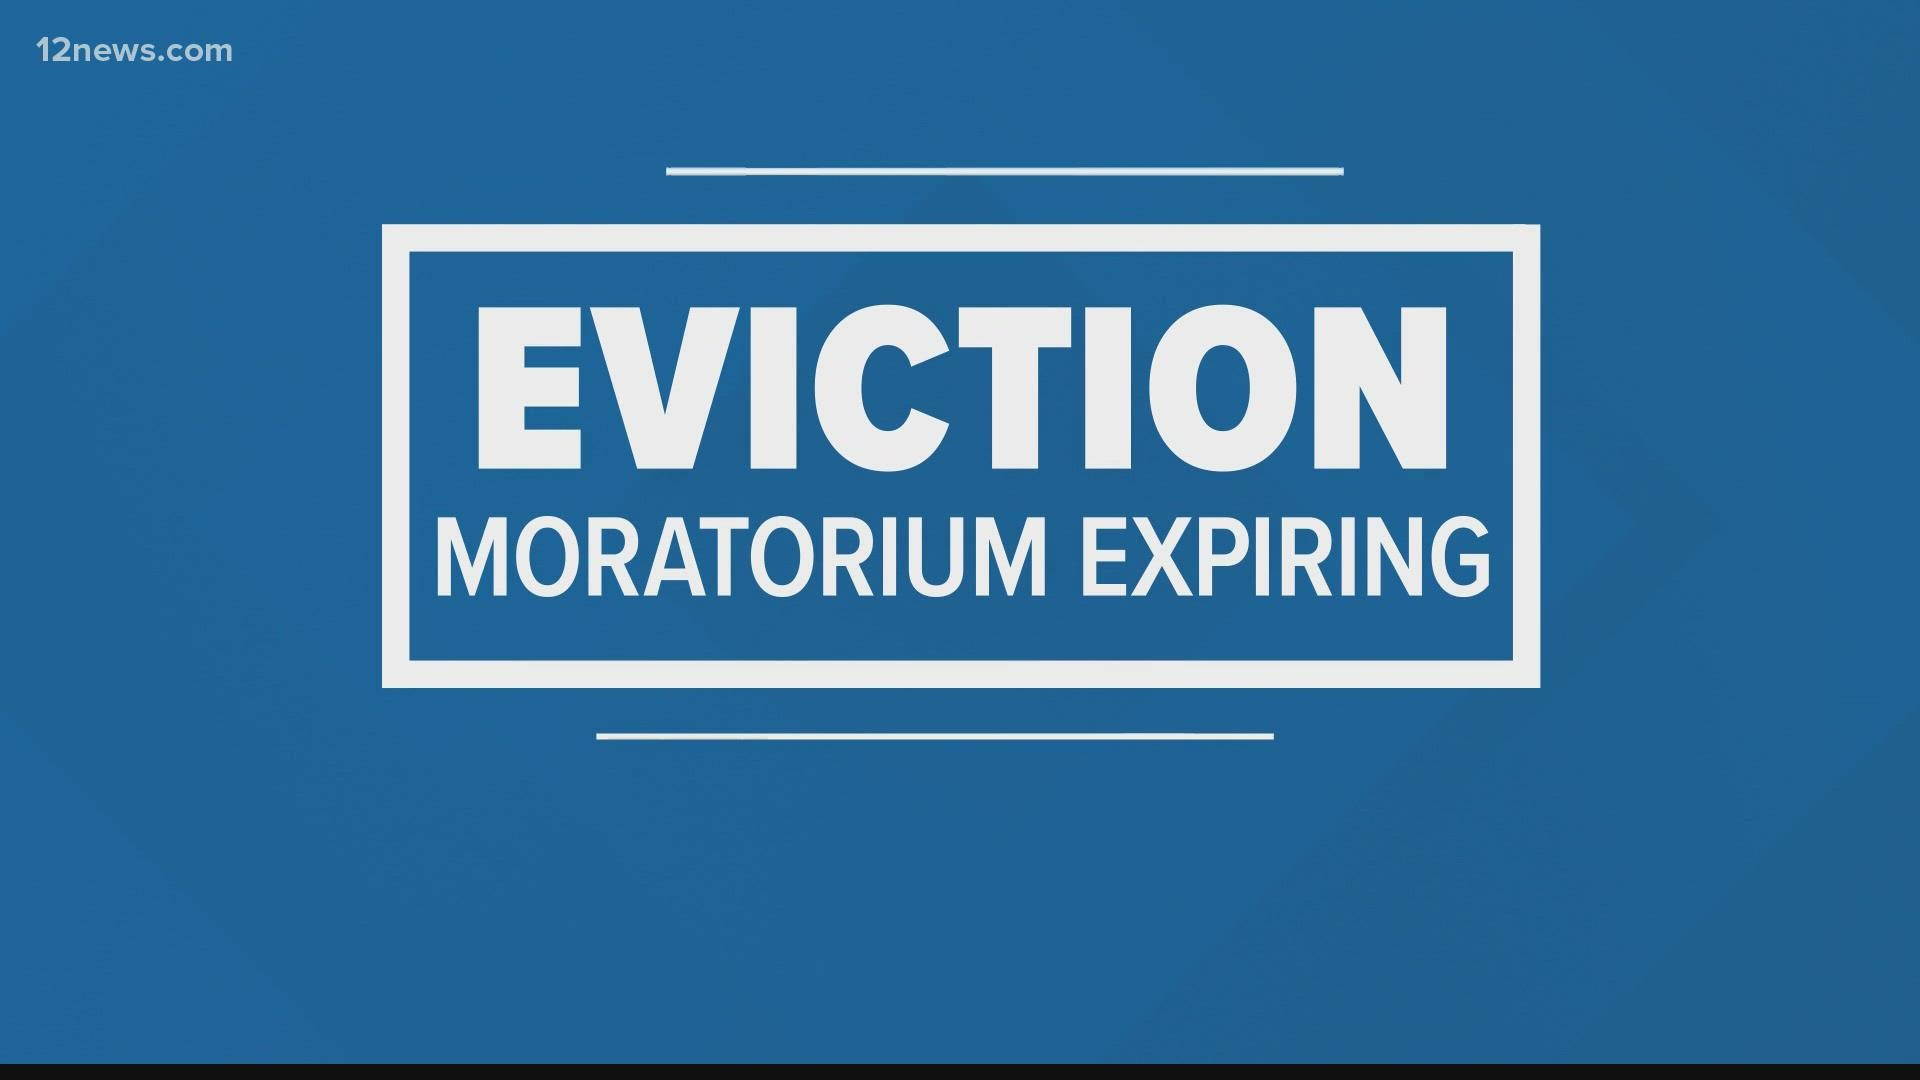 Arizona rental funds remain untapped as the eviction moratorium is set to expire on July 31. The state could see a wave of evictions as the Delta variant surges.